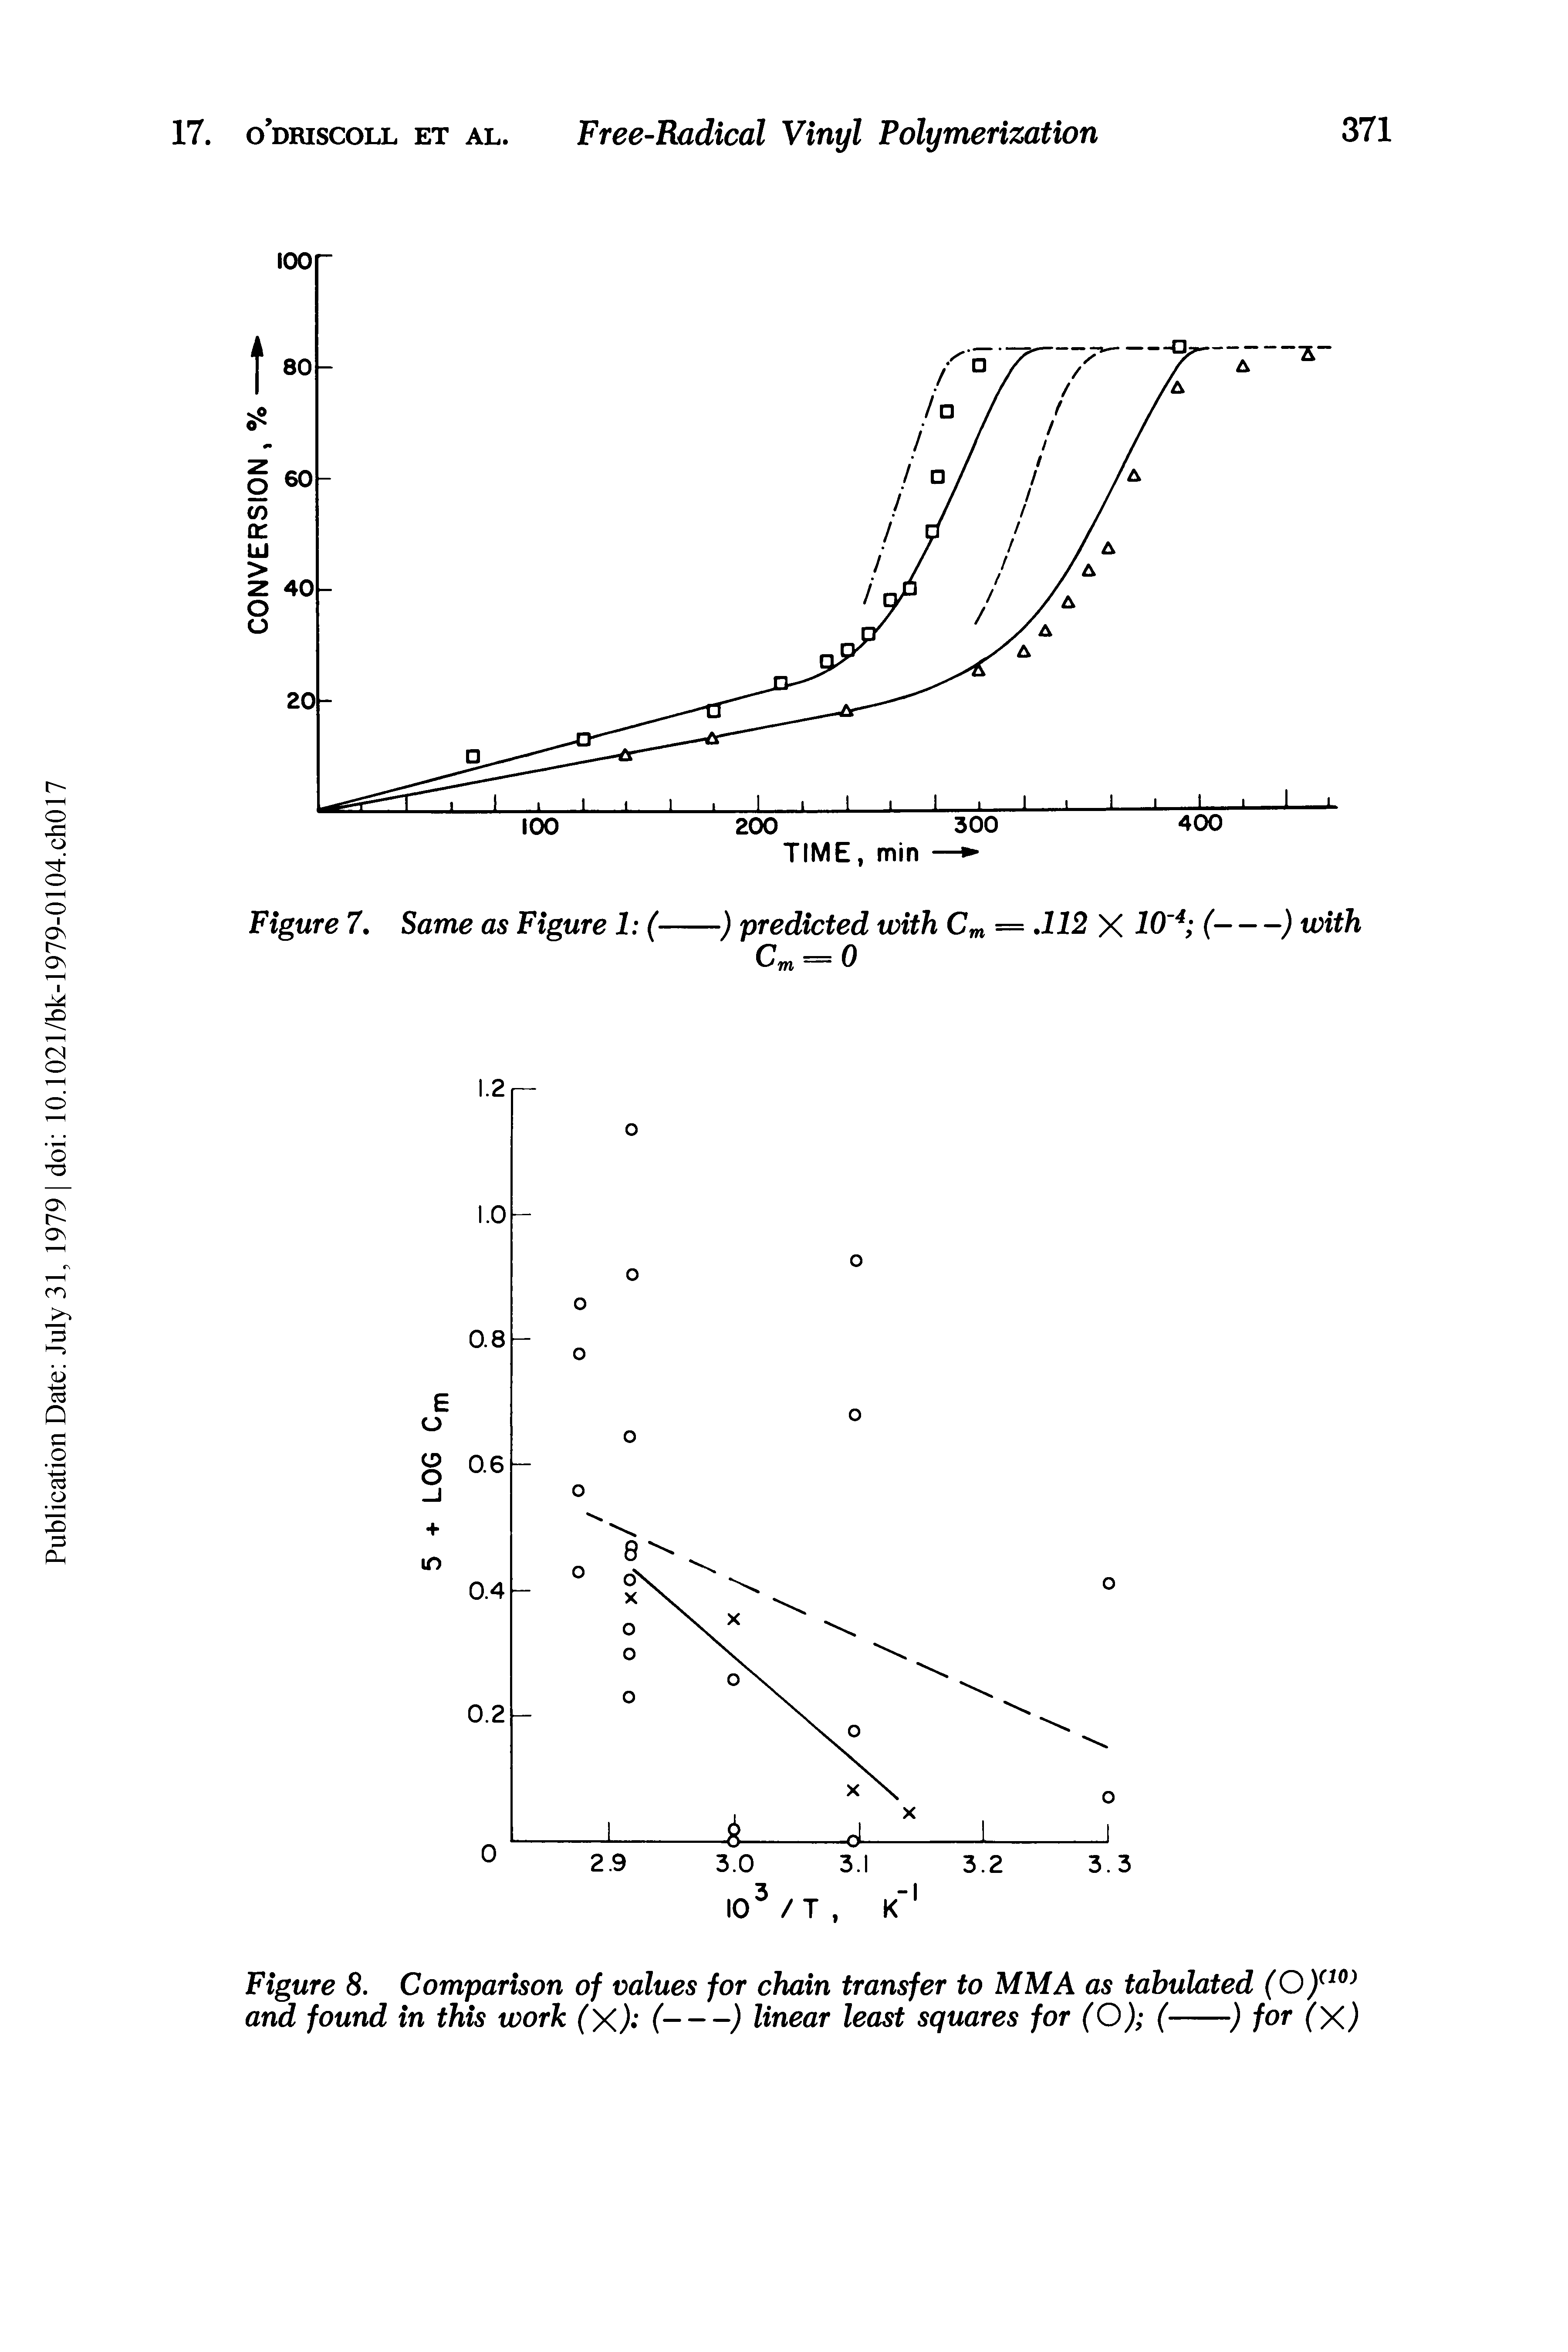 Figure 8. Comparison of values for chain transfer to MM A as tabulated and found in this work (x) (-) linear least squares for (O) (-) for (X)...